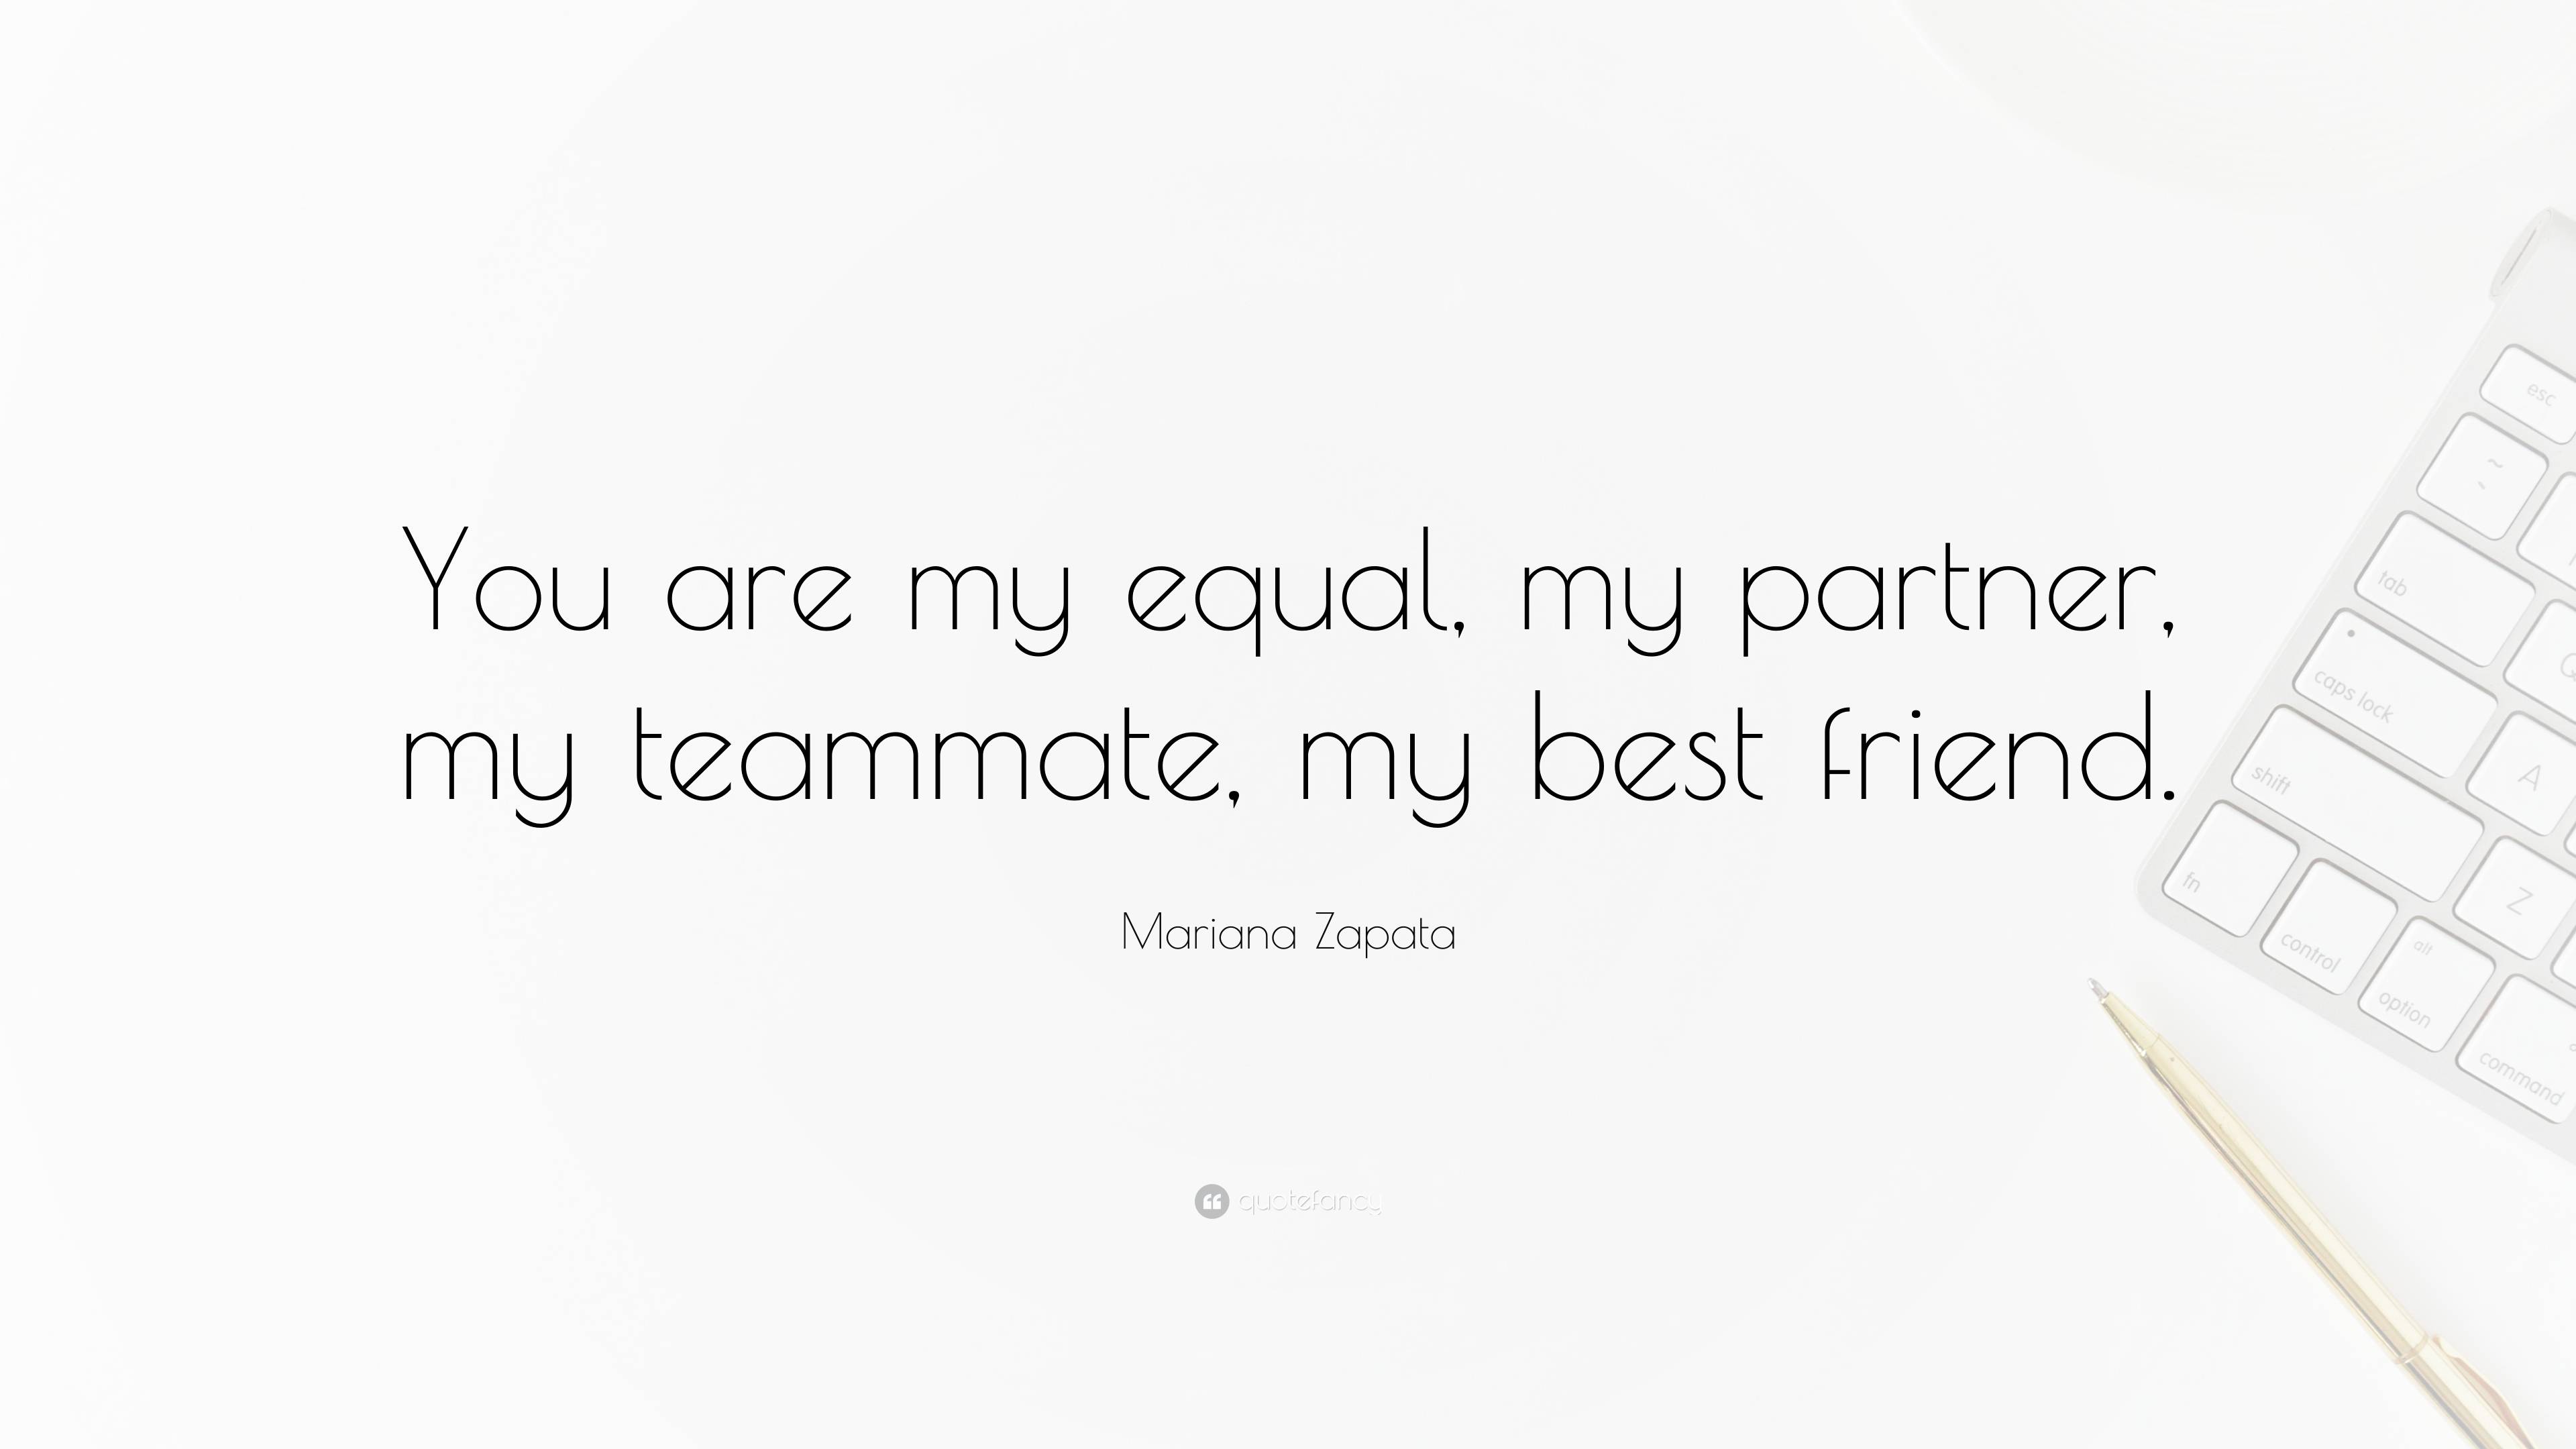 Zapata Quote: “You are my equal, my partner, my my friend.”